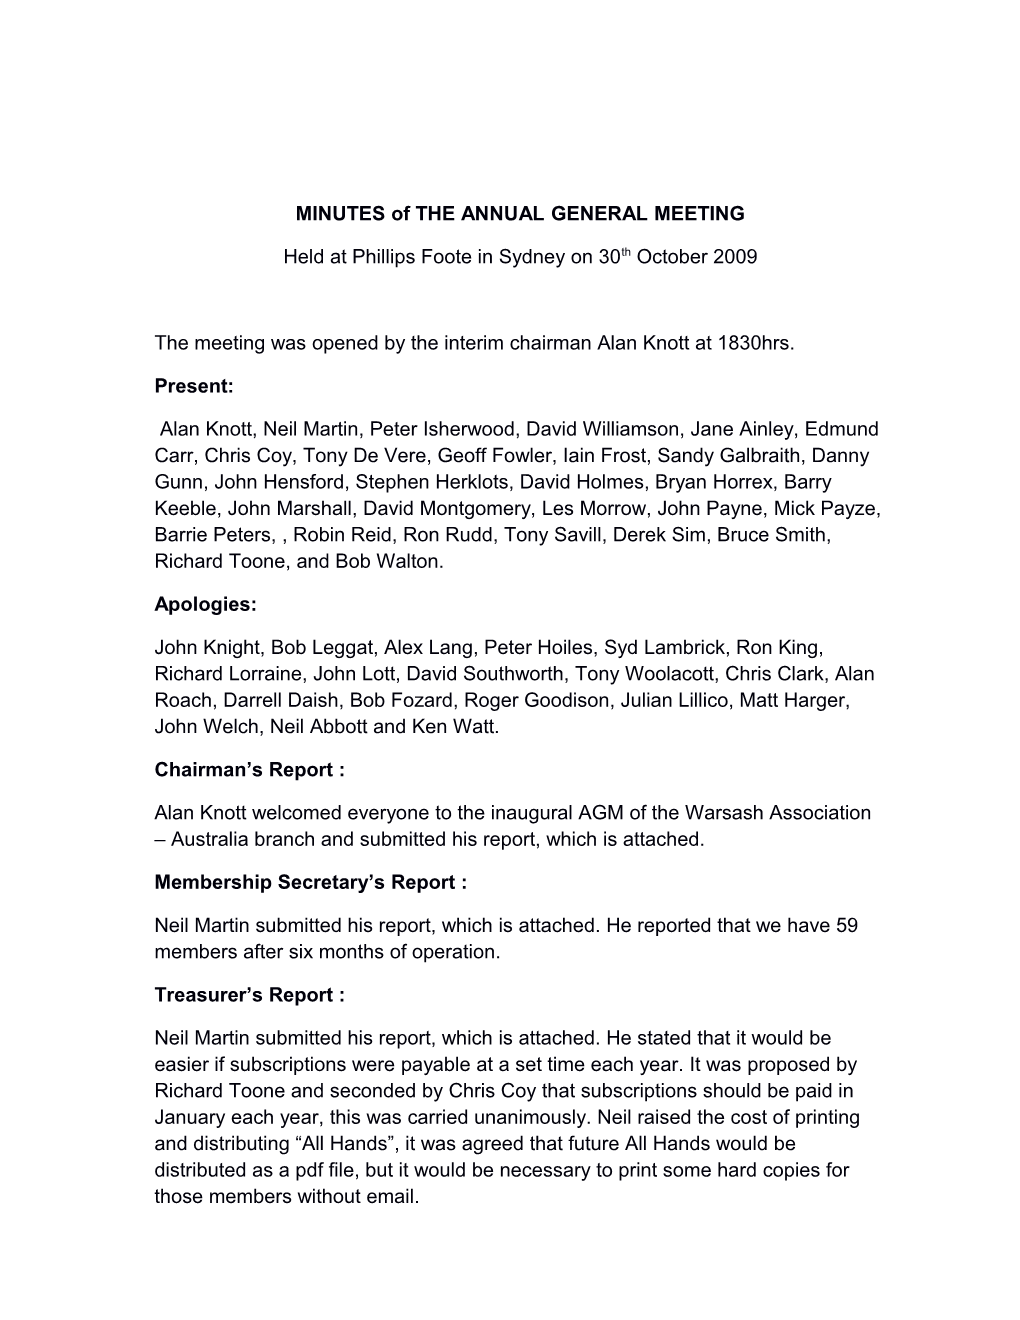 MINUTES for the ANNUAL GENERAL MEETING